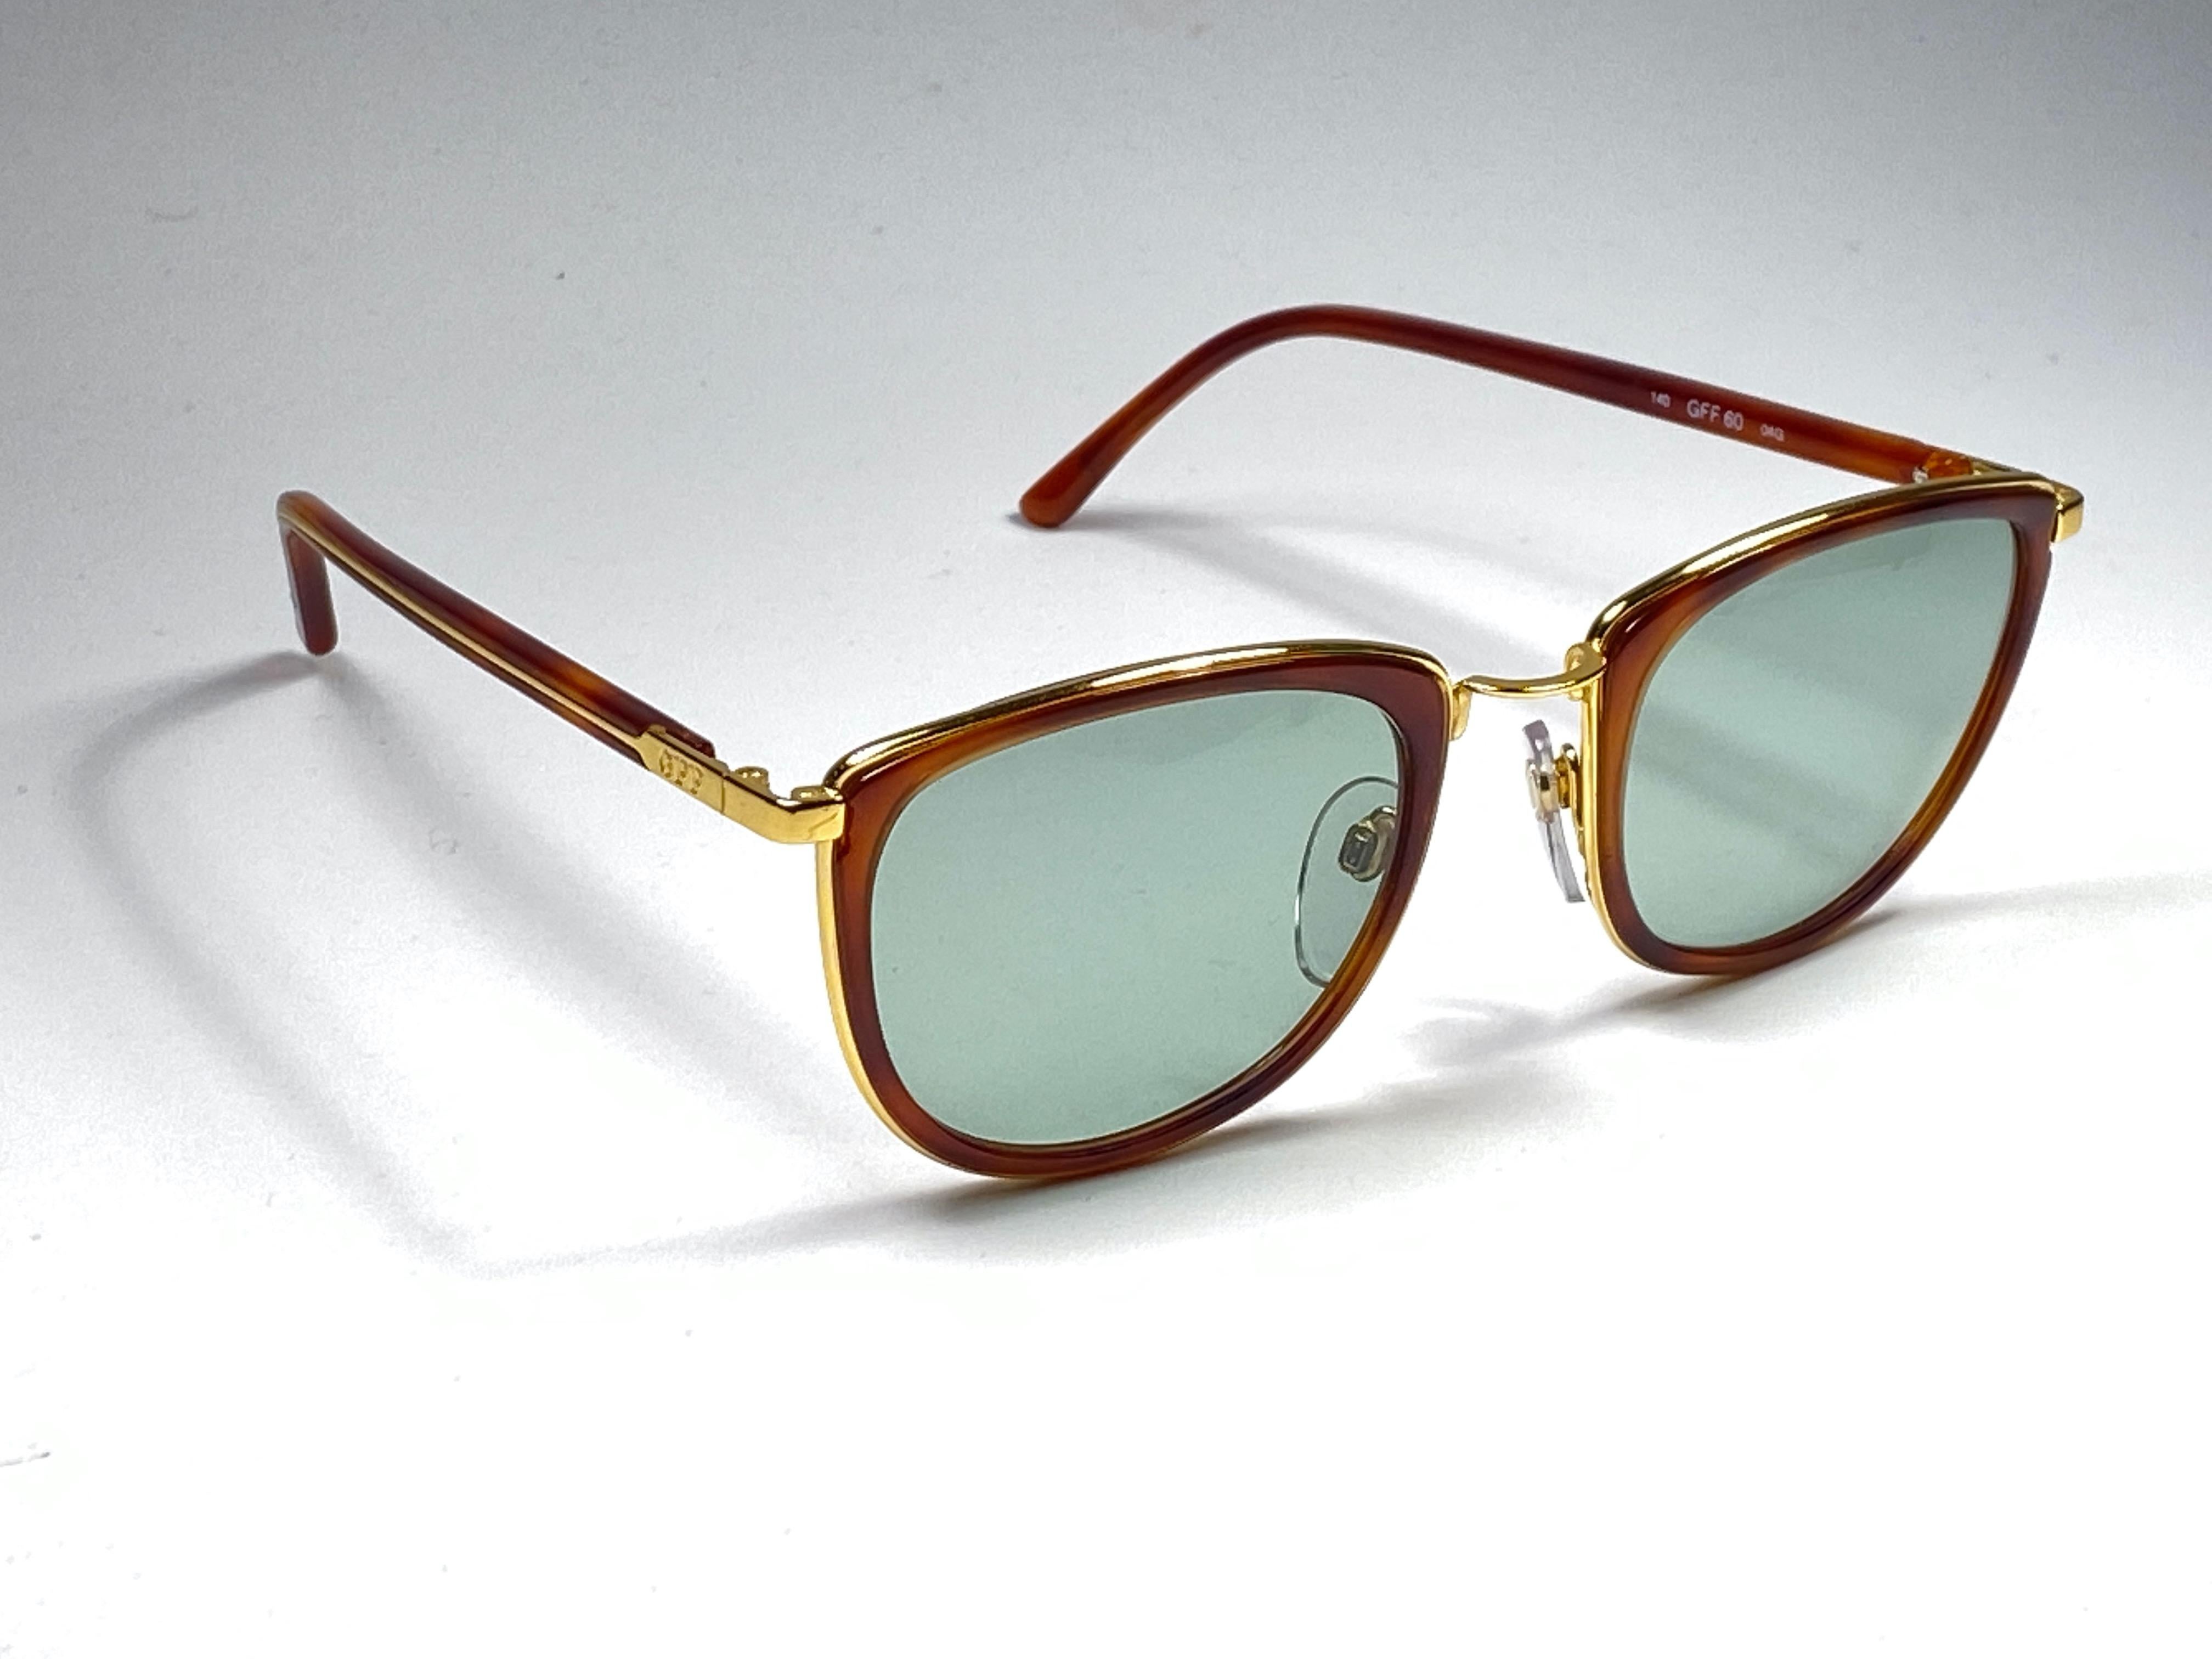 New vintage Gianfranco Ferre sunglasses.

Tortoise with gold details frame holding a pair of spotless green lenses.   

New, never worn or displayed. 

 Made in Italy.

MEASUREMENTS 



FRONT : 14 CMS

LENS HEIGHT : 4.6 CMS

LENS WIDTH : 5.3 CMS